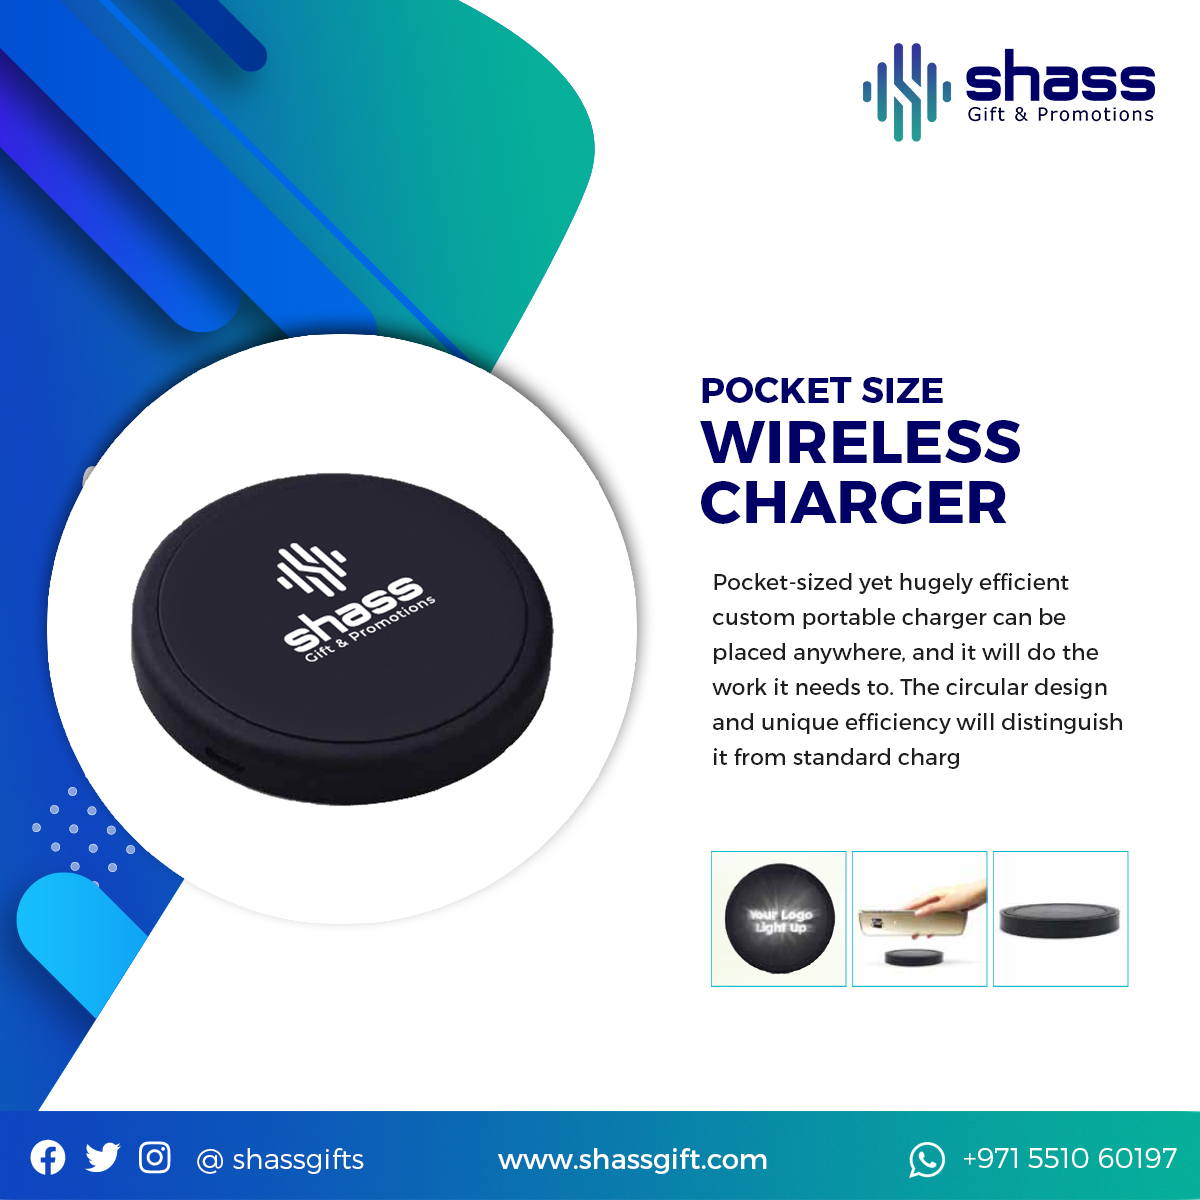 Pocket Size Wireless Charger